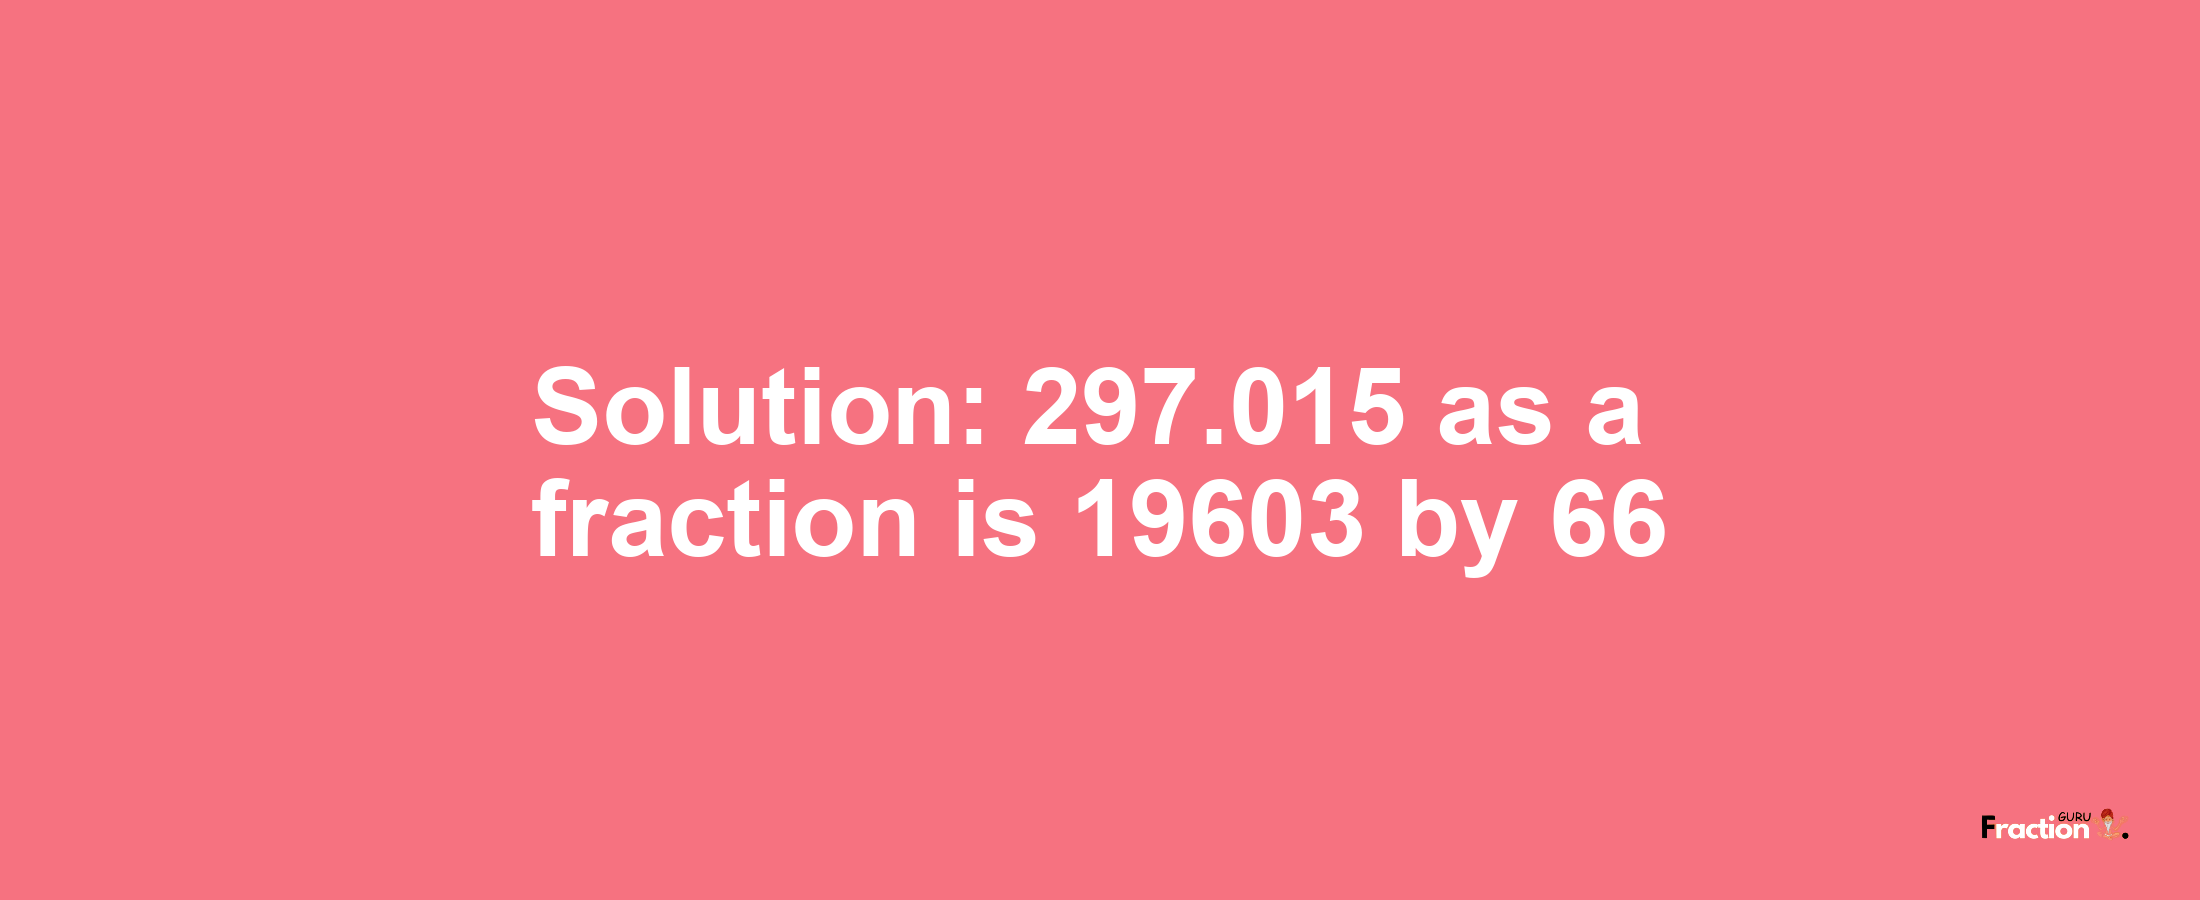 Solution:297.015 as a fraction is 19603/66